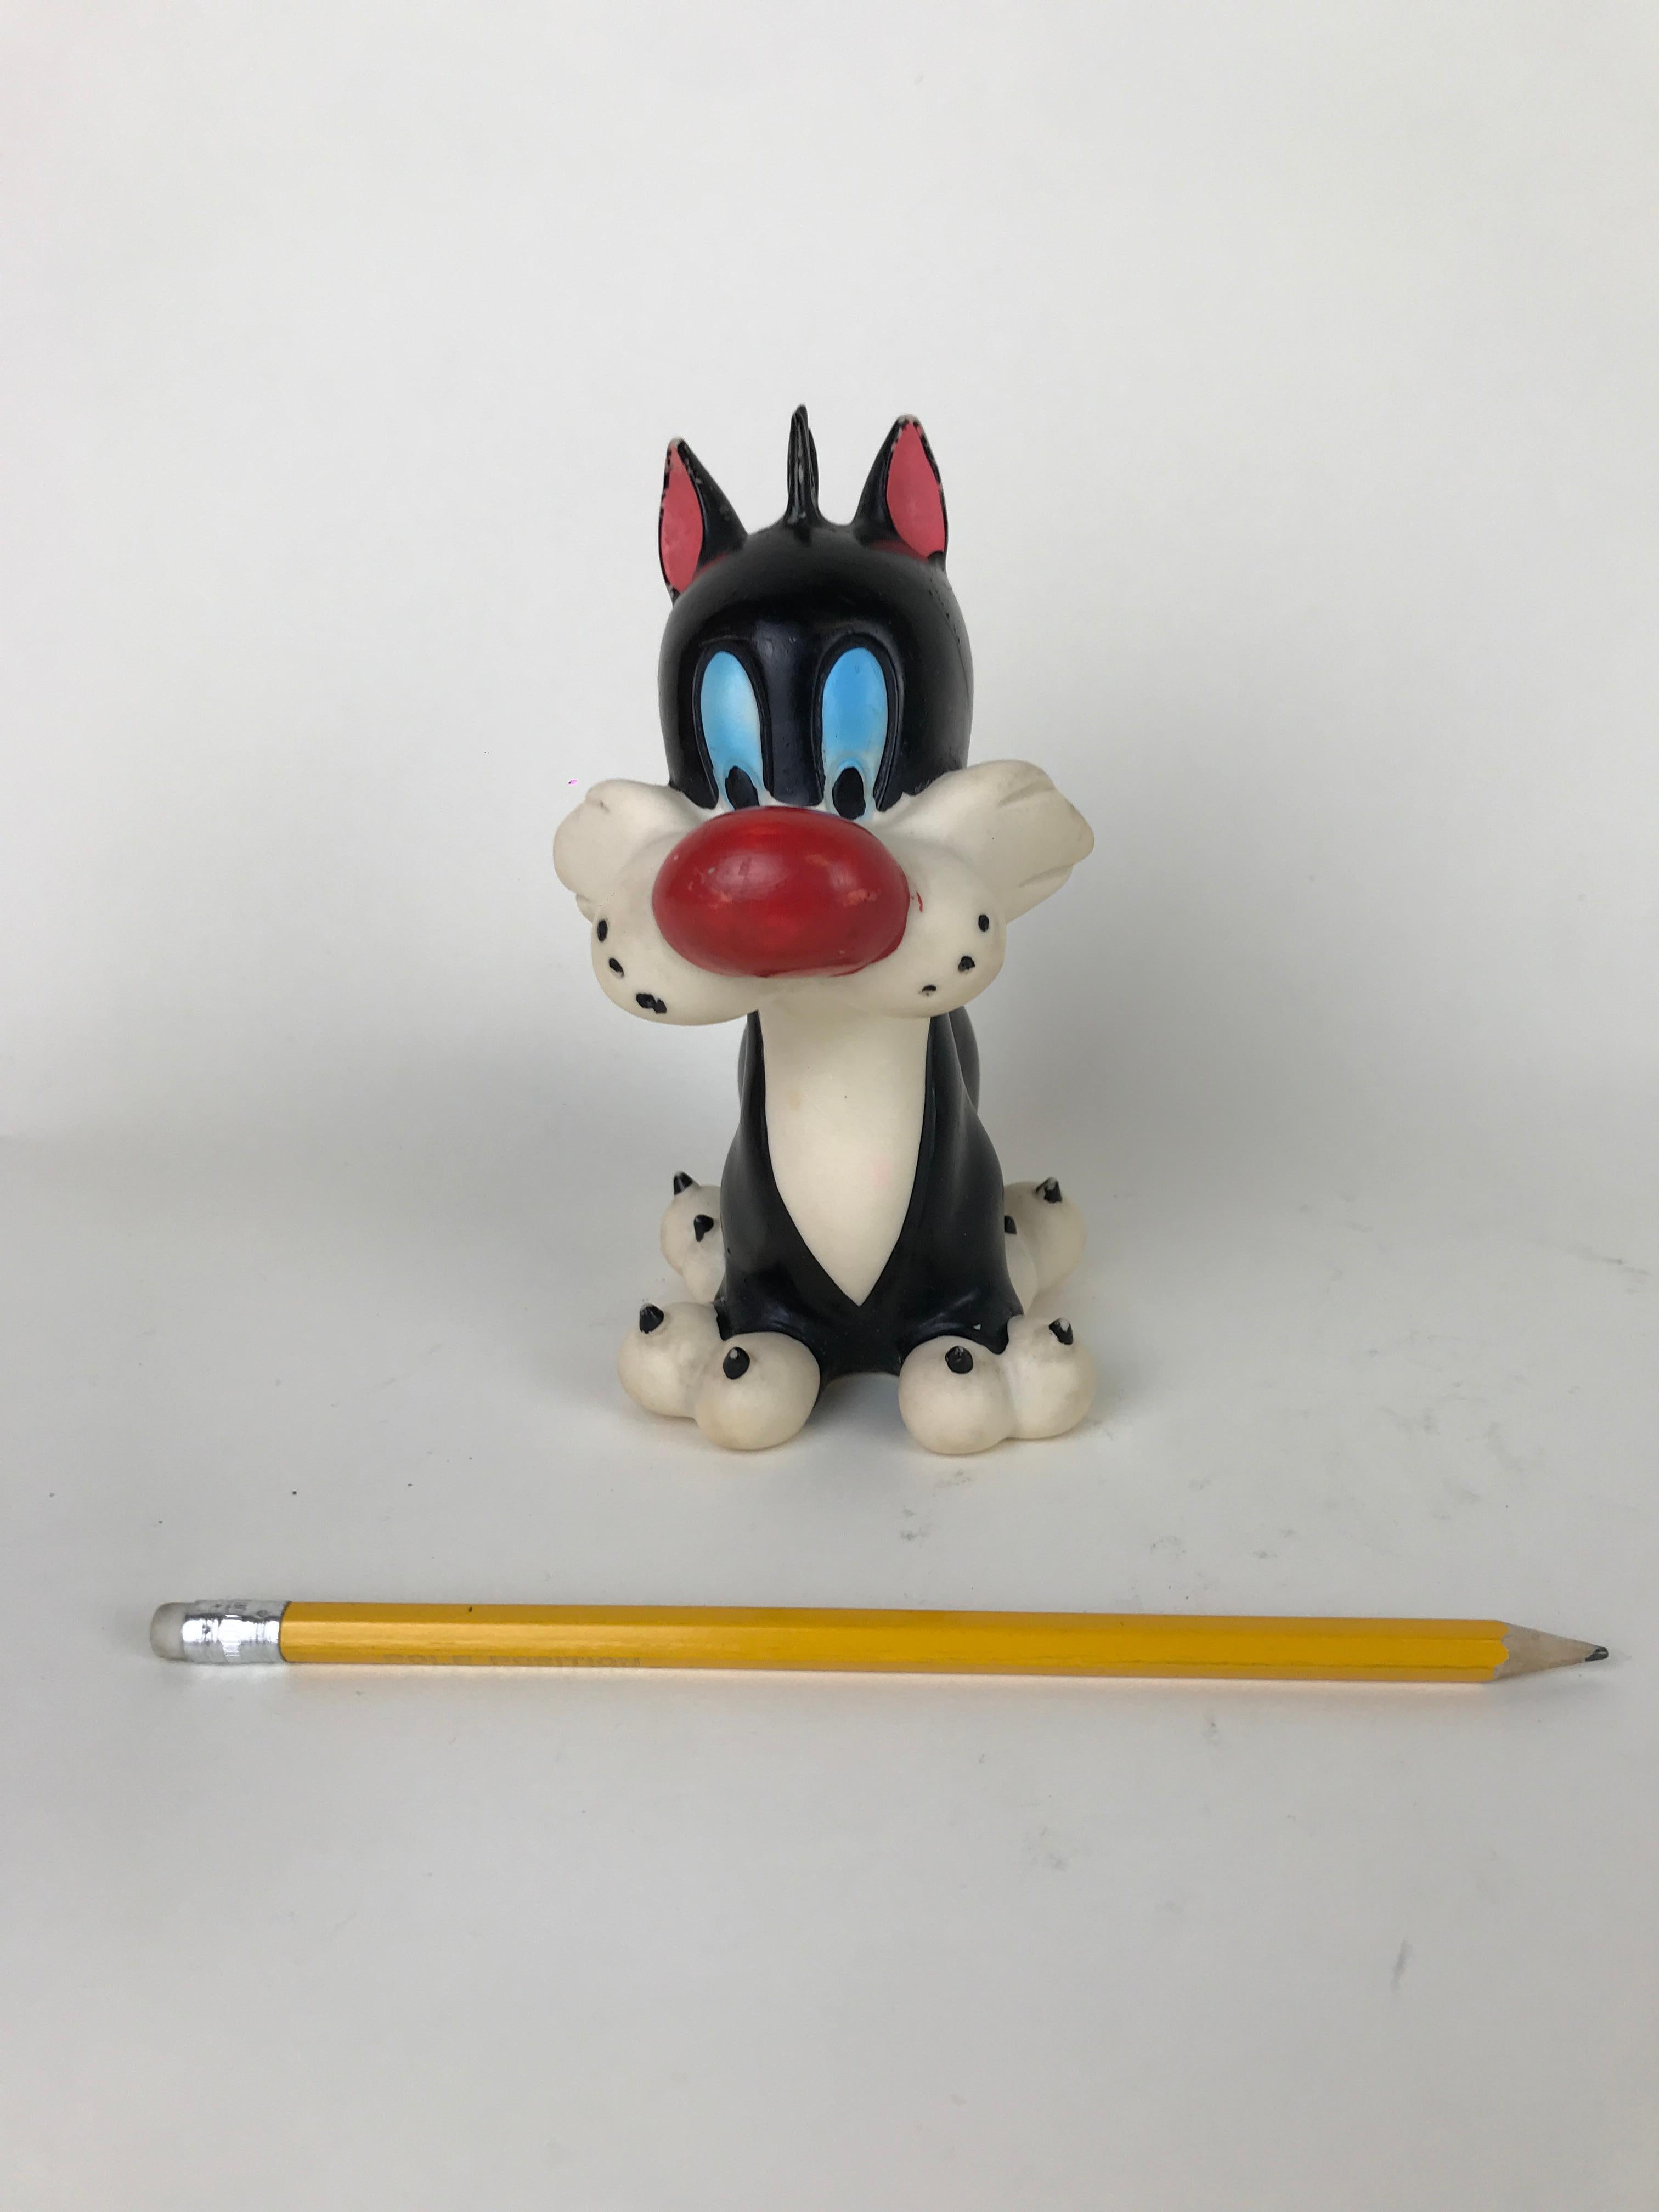 Vintage Sylvester junior rubber squeak toy made for Warner Bros. by Italian toy maker Rubbertoys in the 1960s.

The back of Sylvester junior is marked Rubbertoys made in Italy with the company swan symbol and Warner Bros. 

Collector's